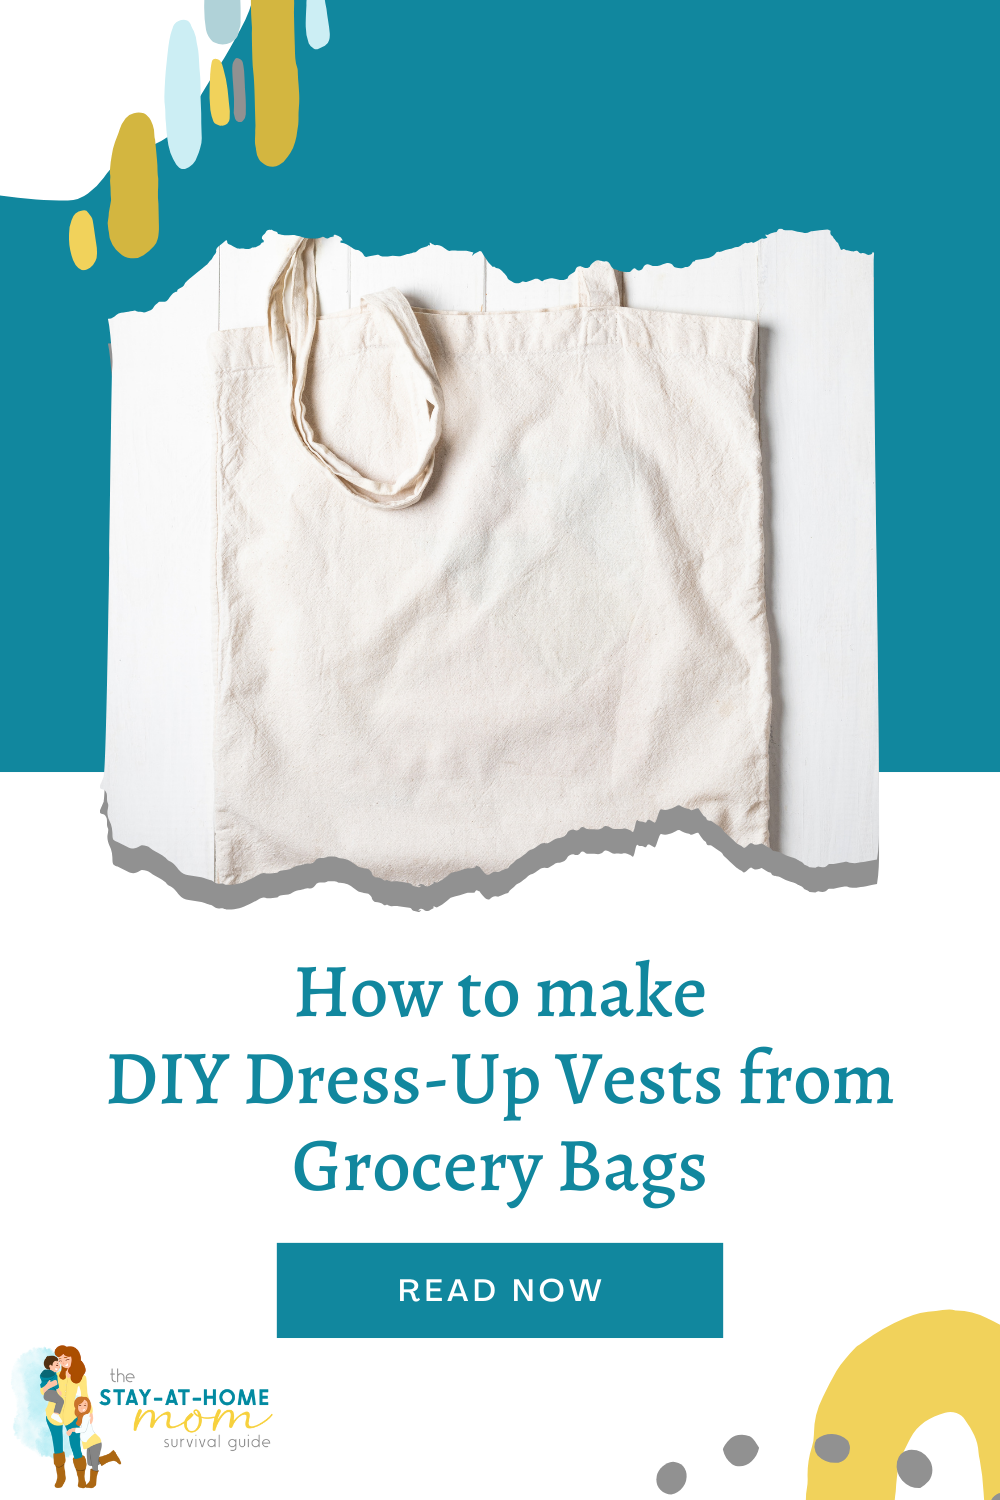 Canvas reusable grocery bag. Tet reads how to make DIY dress up vests from grocery bags. Easy kids dress up costume idea.